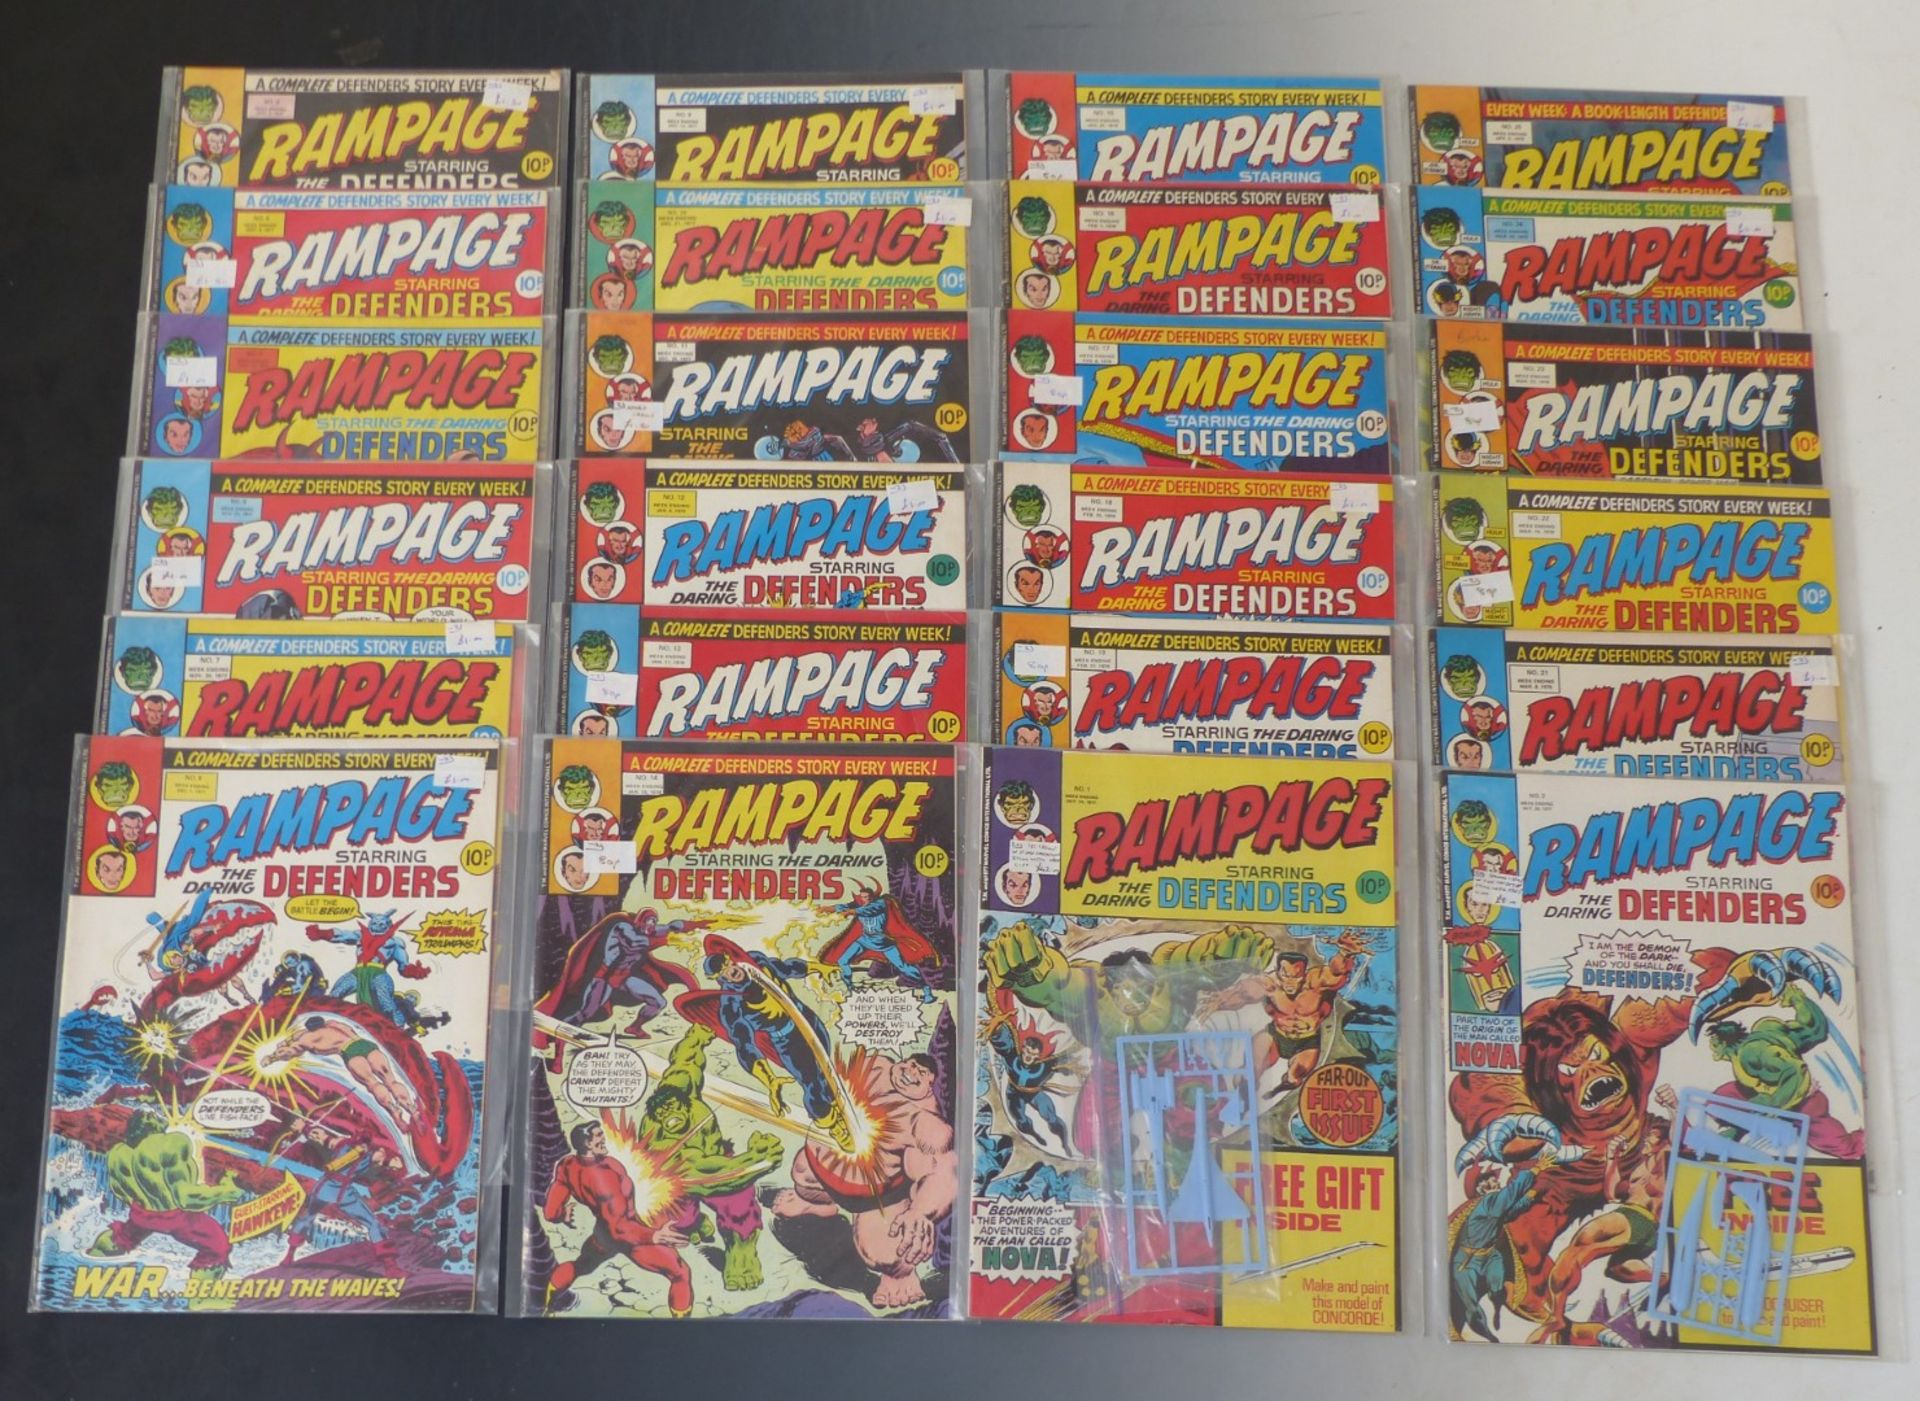 The first 25 issues of Marvel Rampage comic including the first two with free gifts.